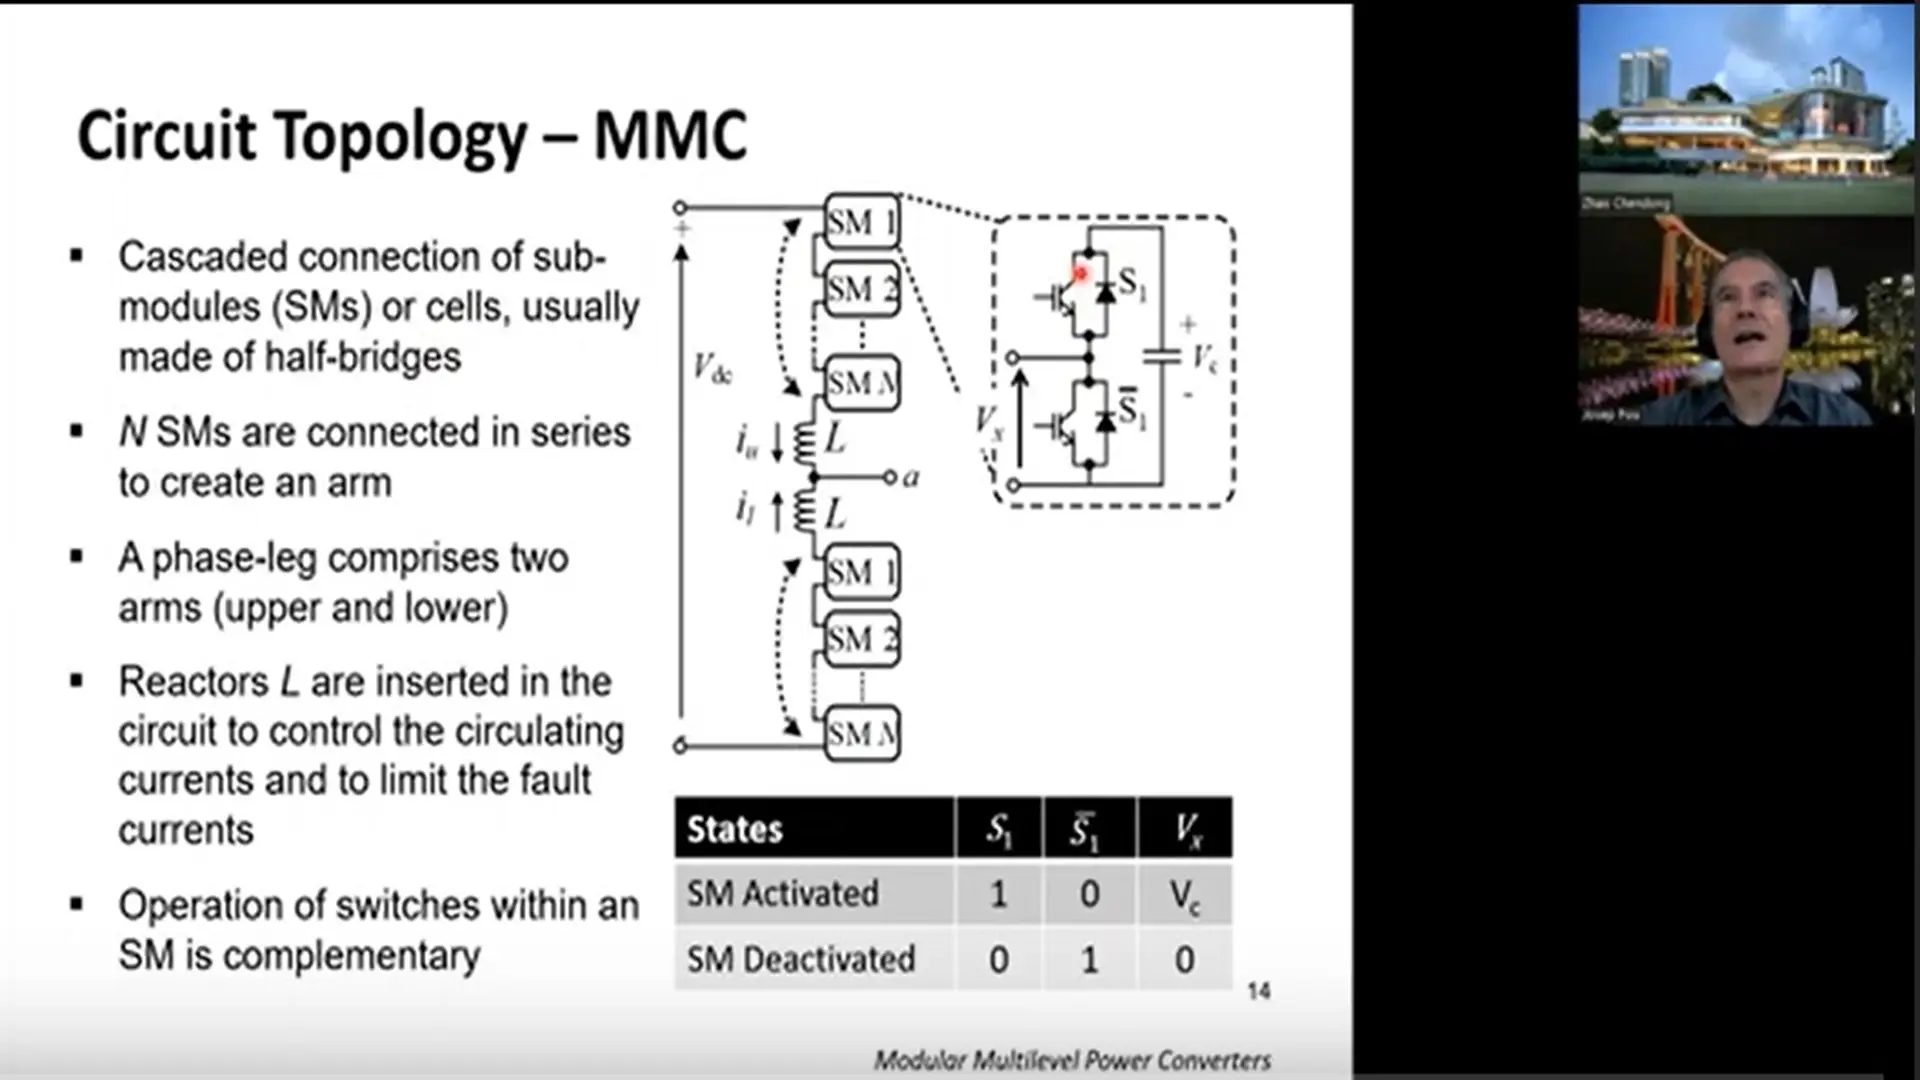 Advances and Trends in Modular Multilevel Power Converters for Medium Voltage Grid Applications Part 1